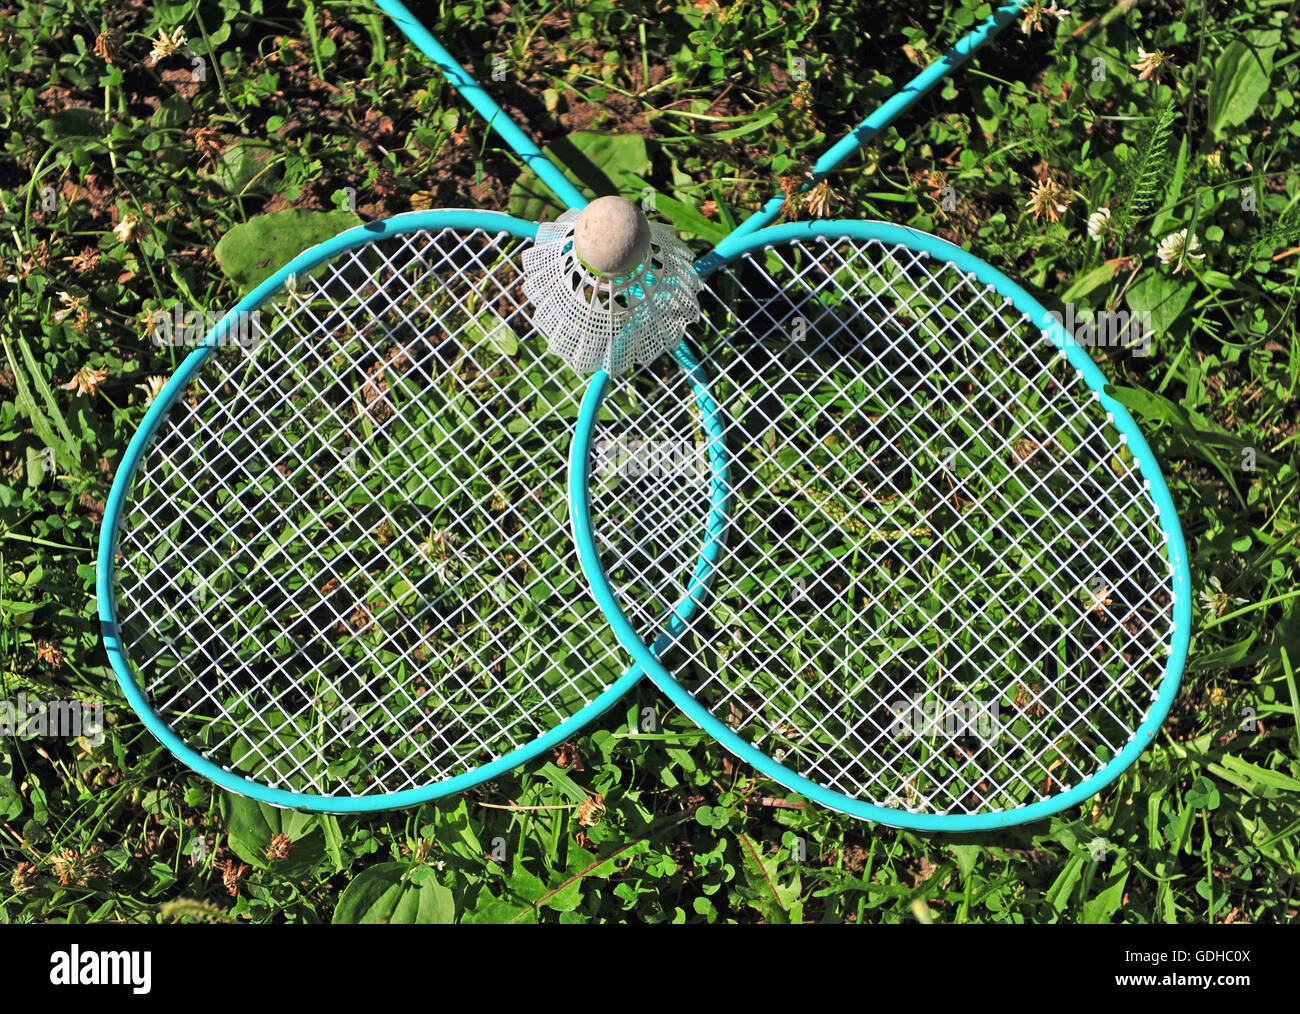 Badminton rackets in the grass Stock Photo